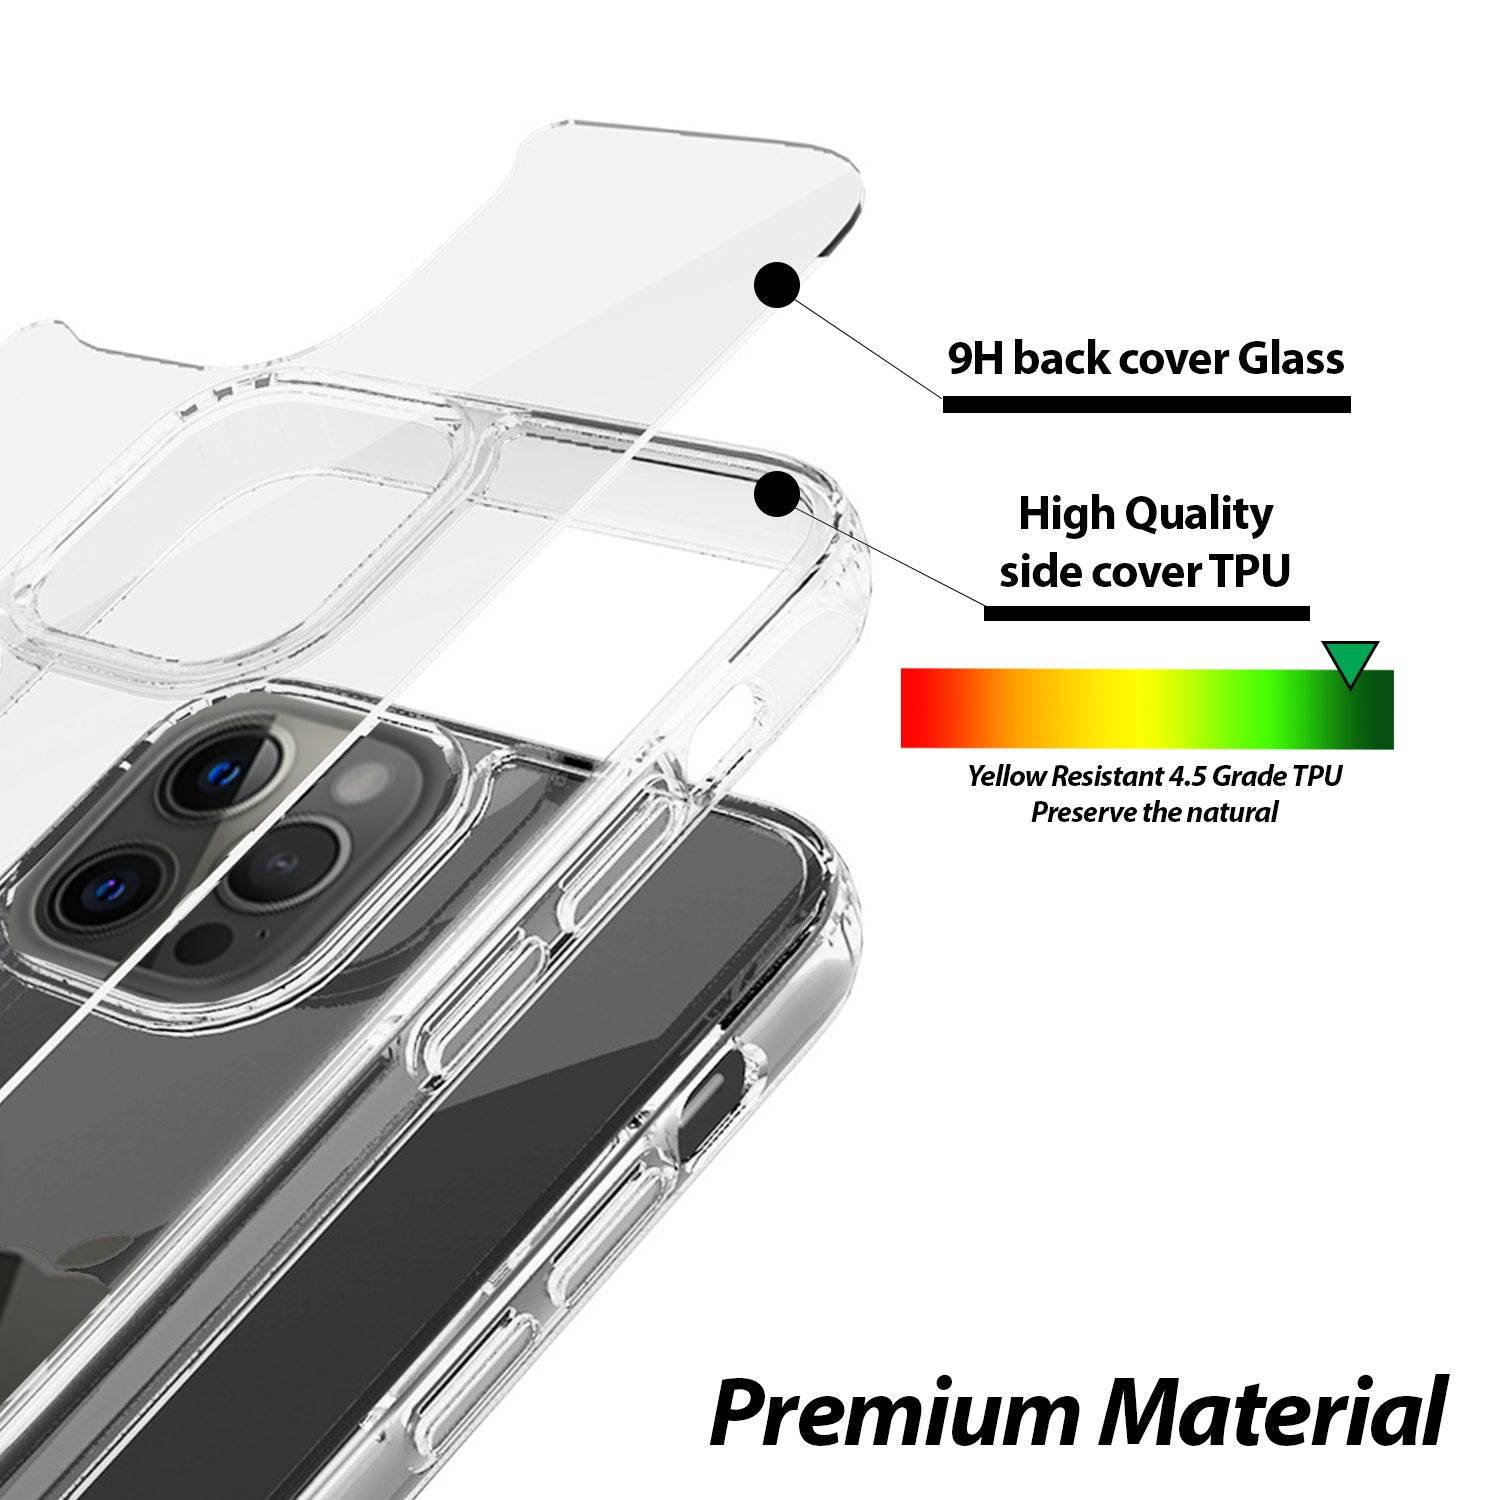 [Dome Case] iPhone 12 Pro Max (6.7) Clear case by Whitestone, Premium  Tempered Glass Back Cover - Clear